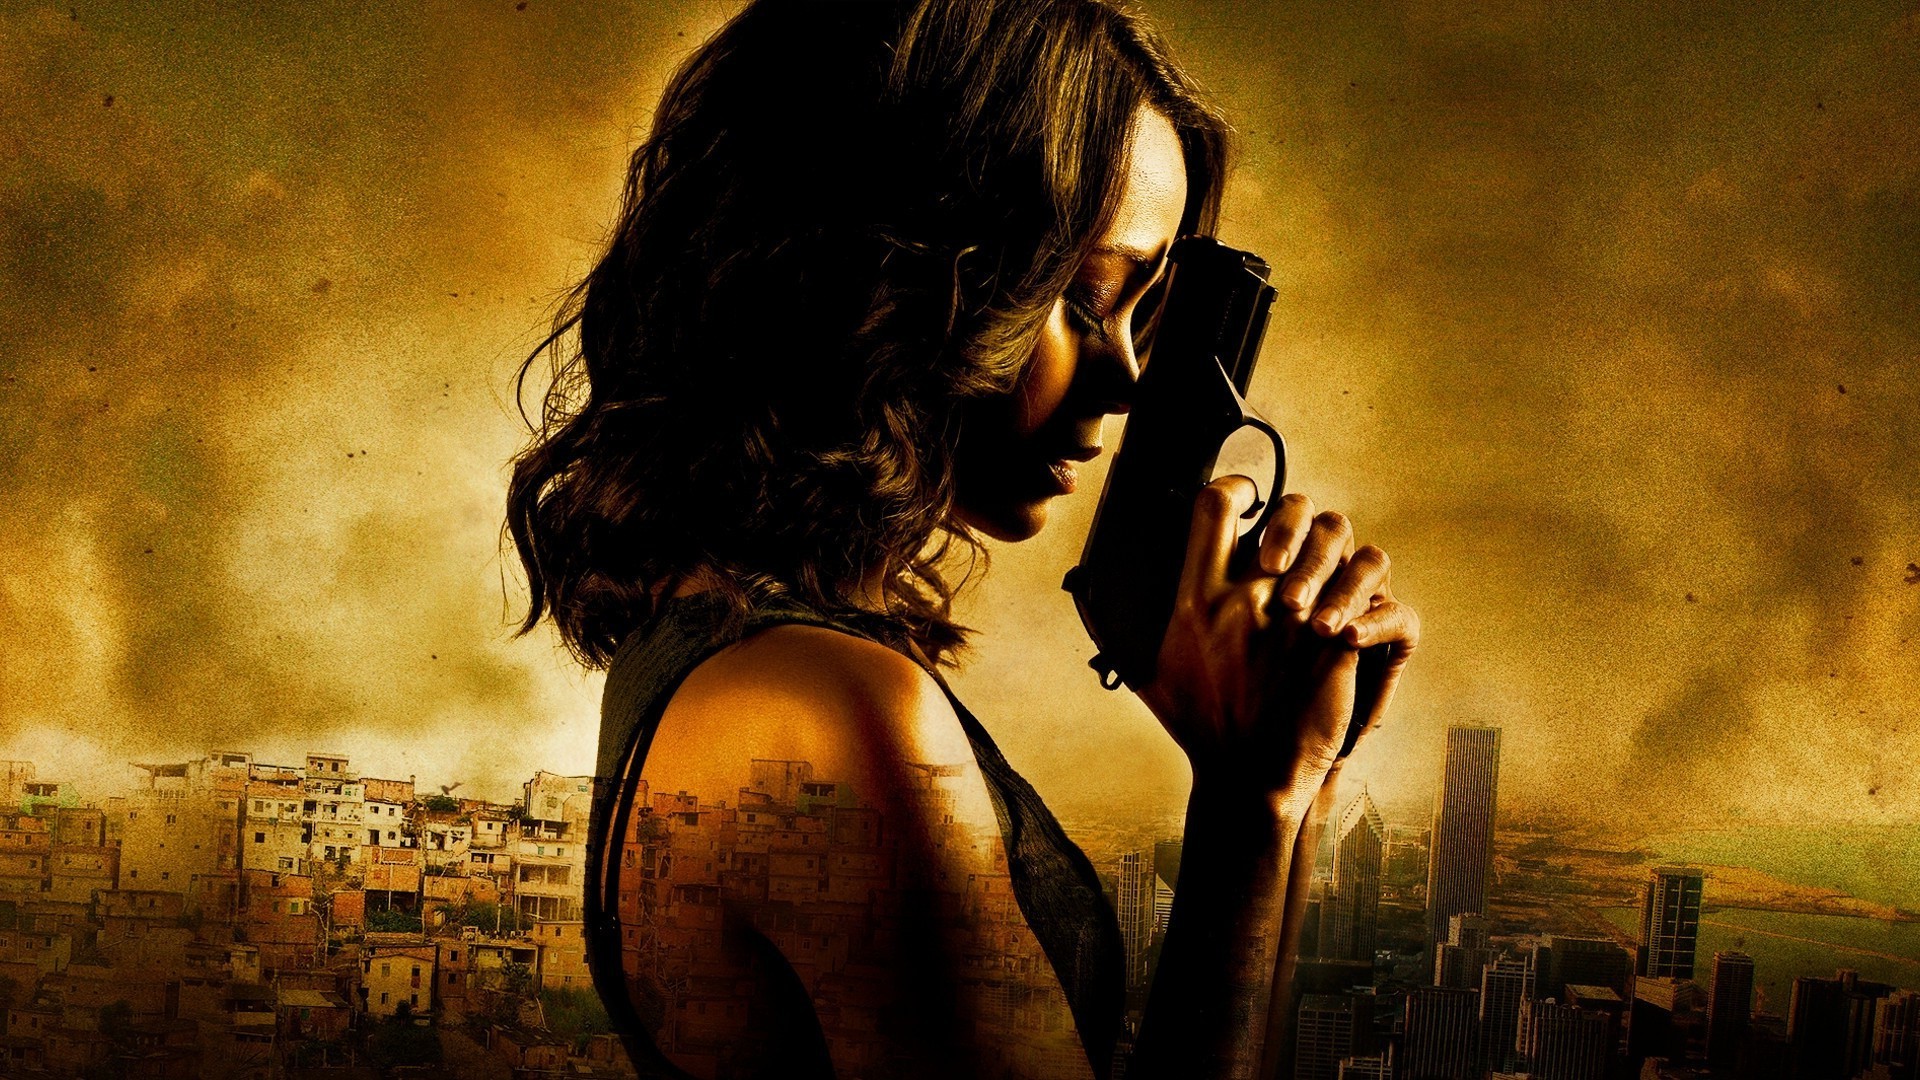 colombiana full movie download